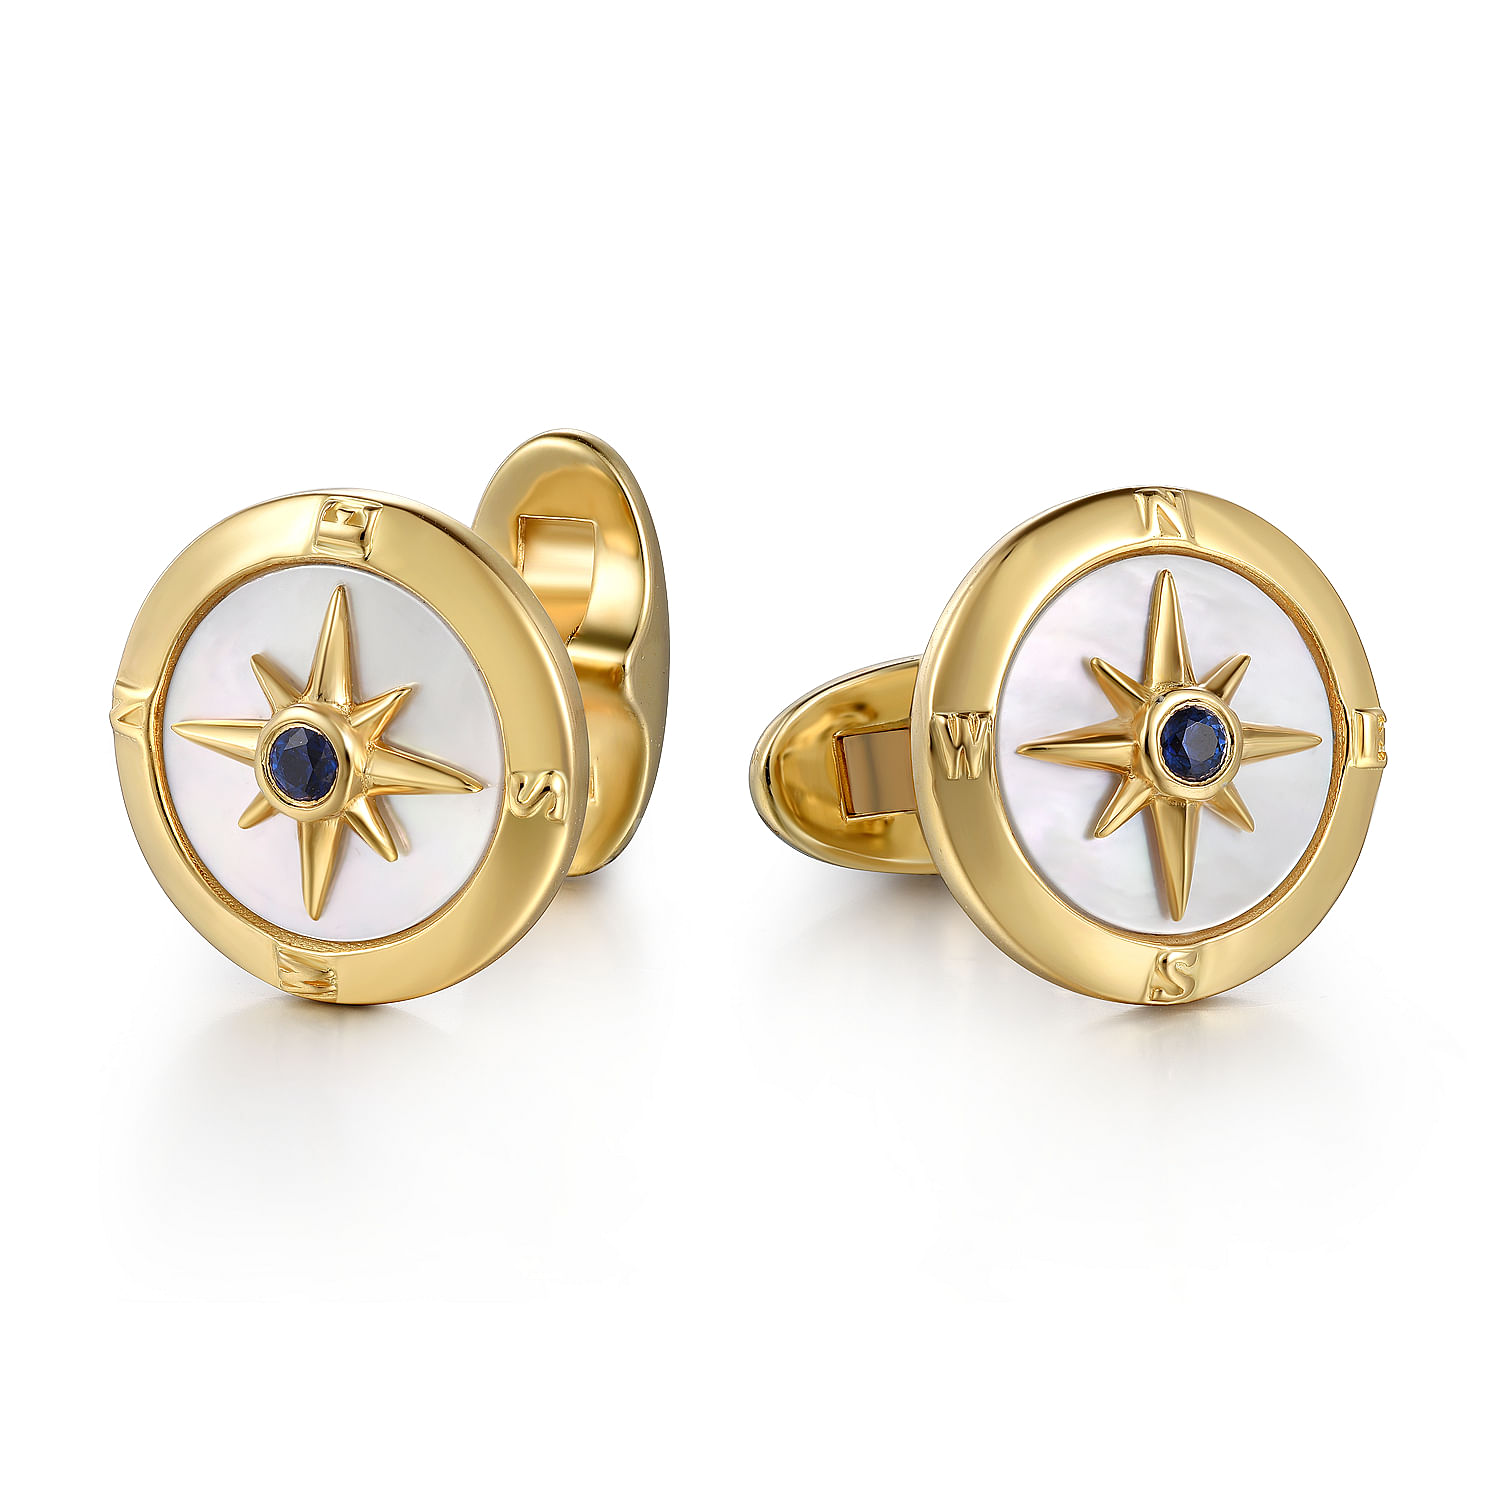 14K Yellow Gold Round Cufflinks with Sapphire and White Mother of Pearl